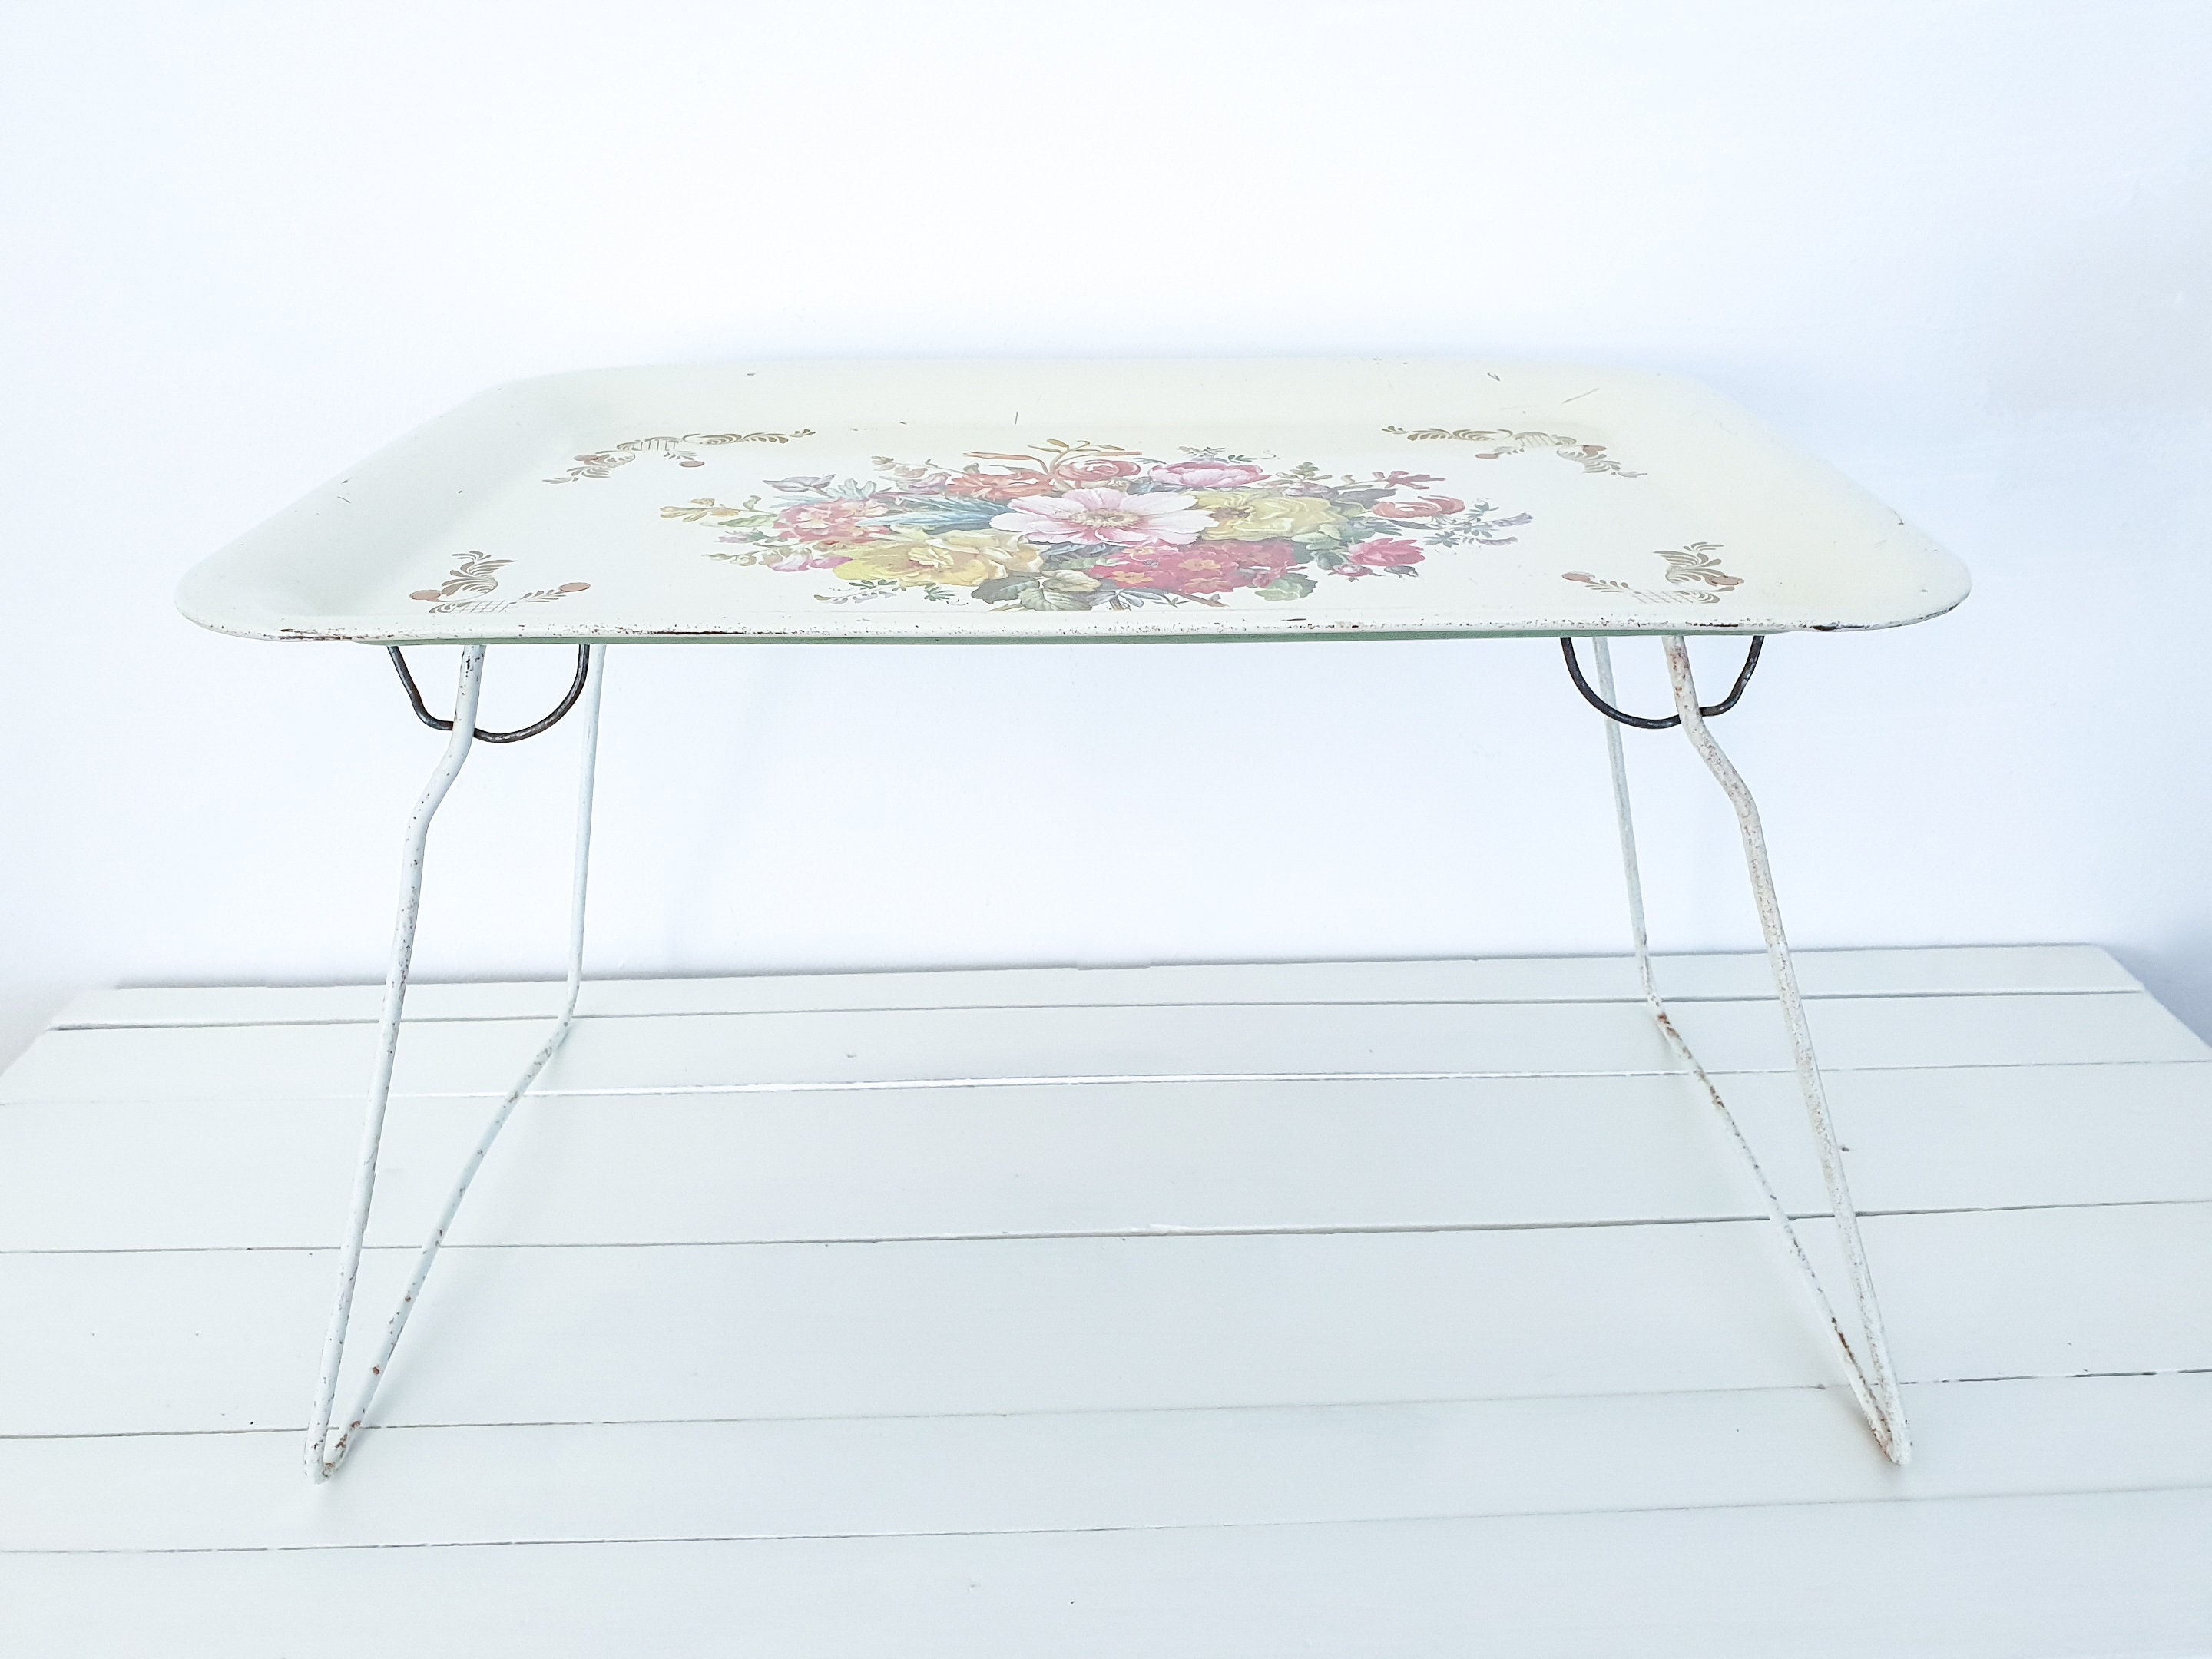 Vintage Foldable Metal Bed Tray Flowers Shabby Chic Lap Desk